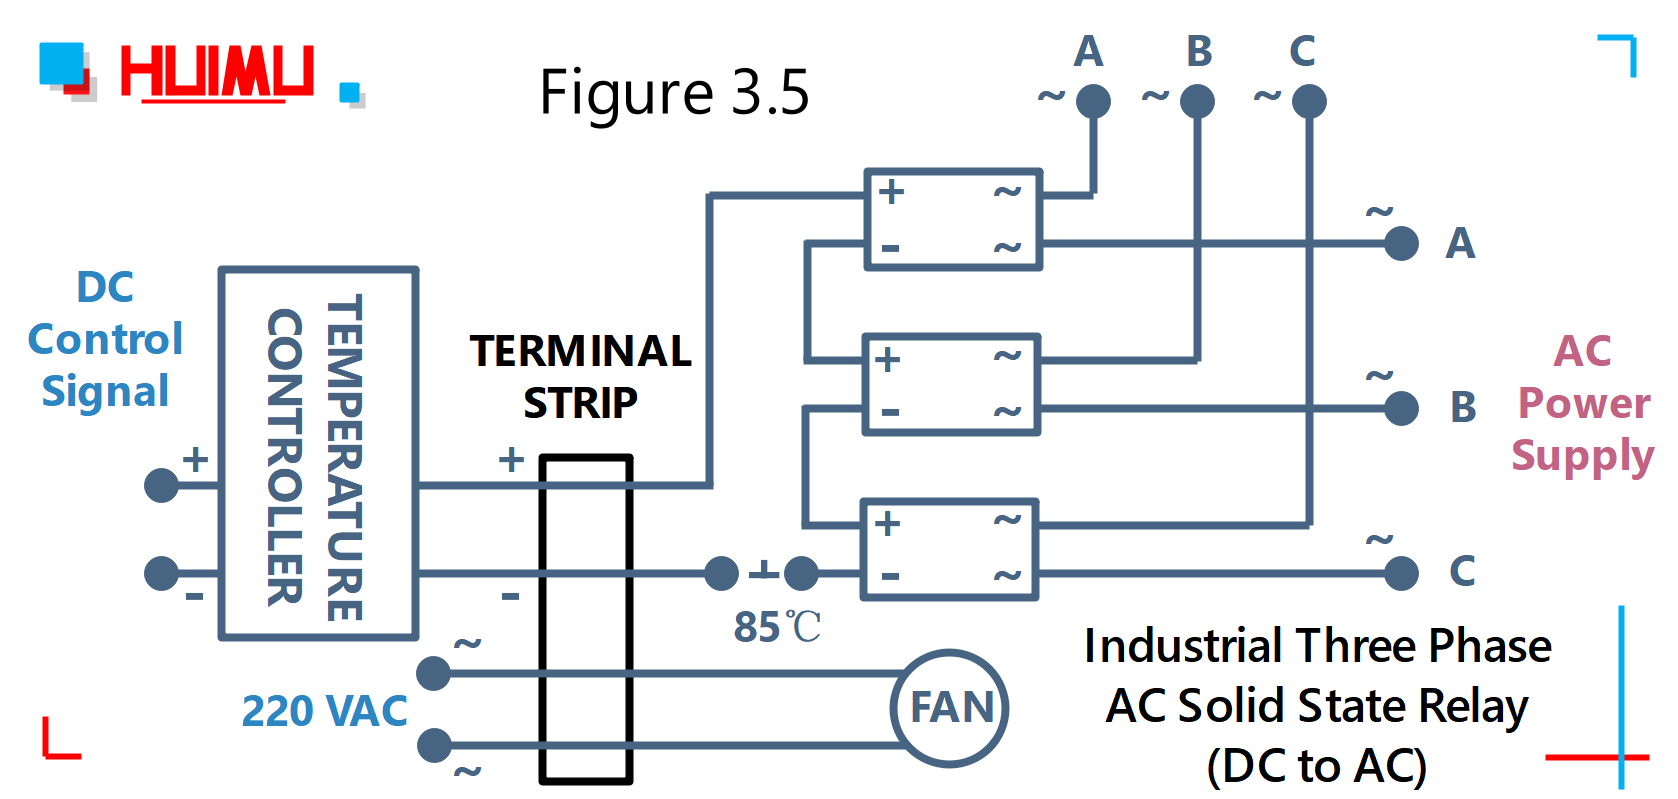 industrial three phase AC solid state relay (DC to AC) wiring diagram and circuit diagram Type 5